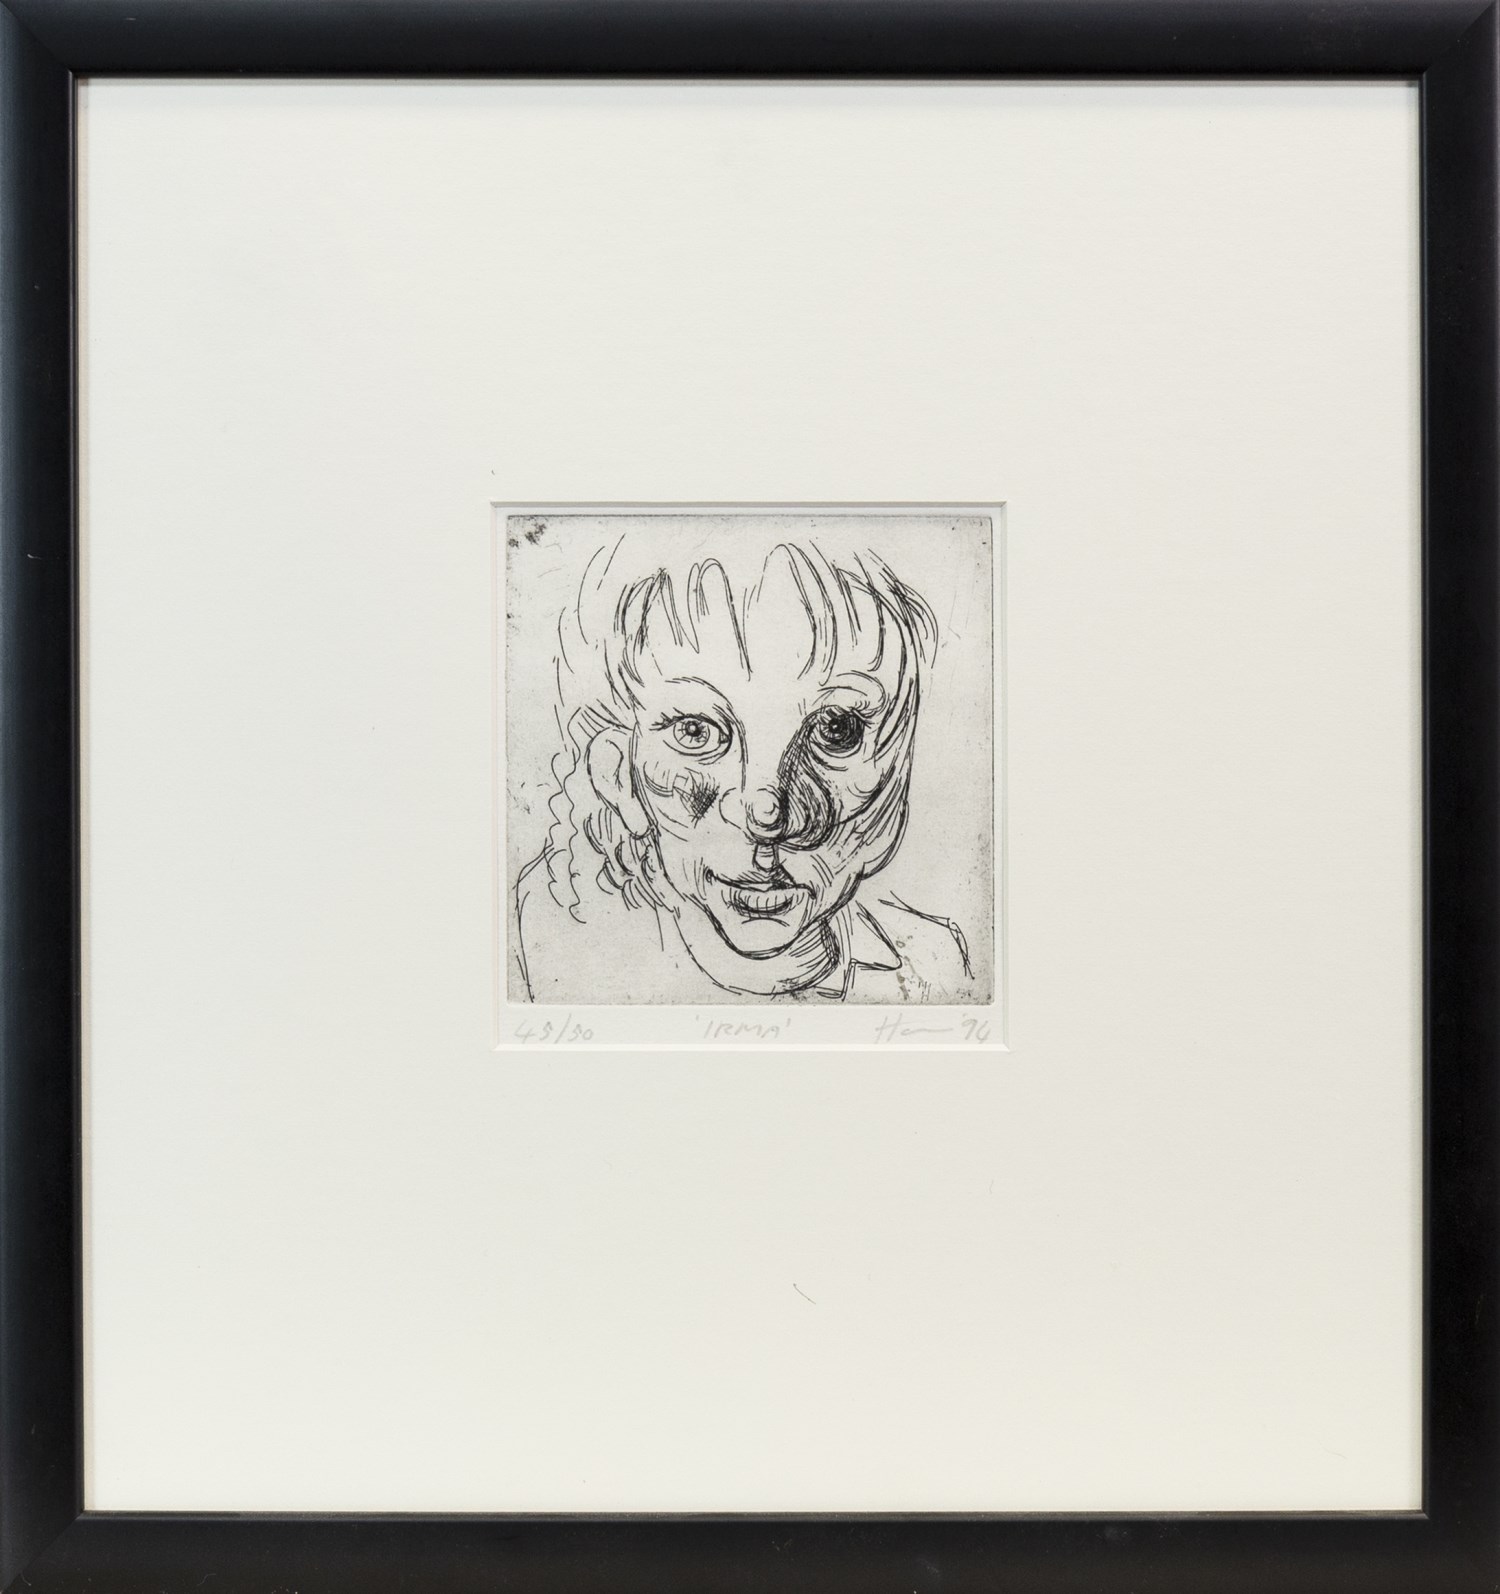 IRMA, A LIMITED EDITION DRYPOINT BY PETER HOWSON - Image 2 of 2